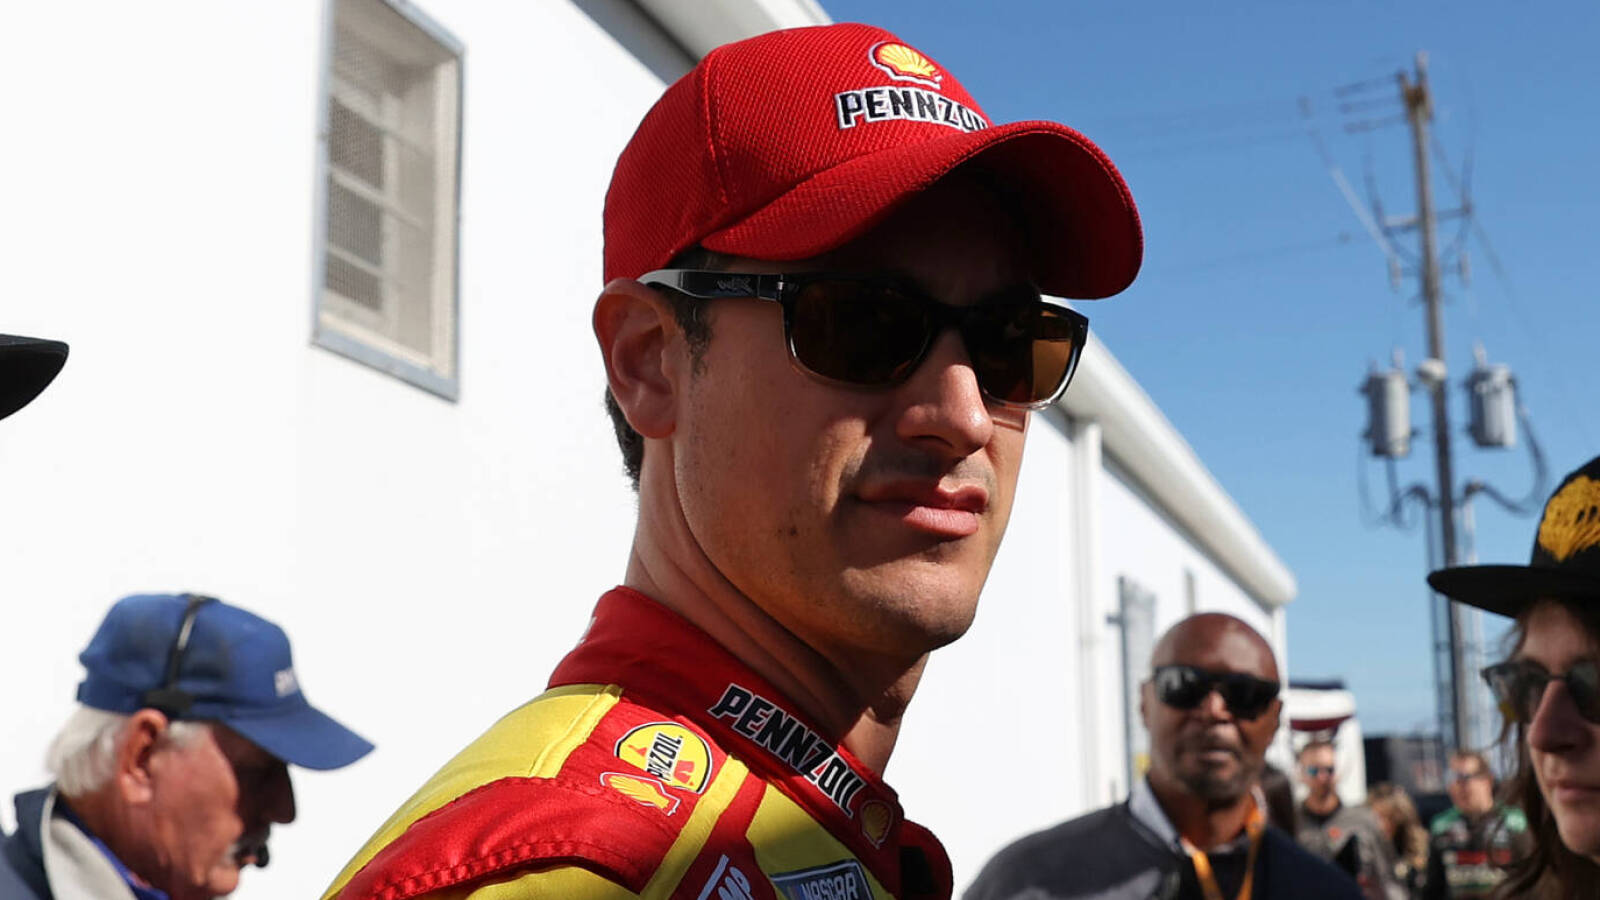 Watch: Dejected Joey Logano laments the Daytona 500 loss despite having a ‘rocket ship’ after getting collected in the 22-car mega wreck